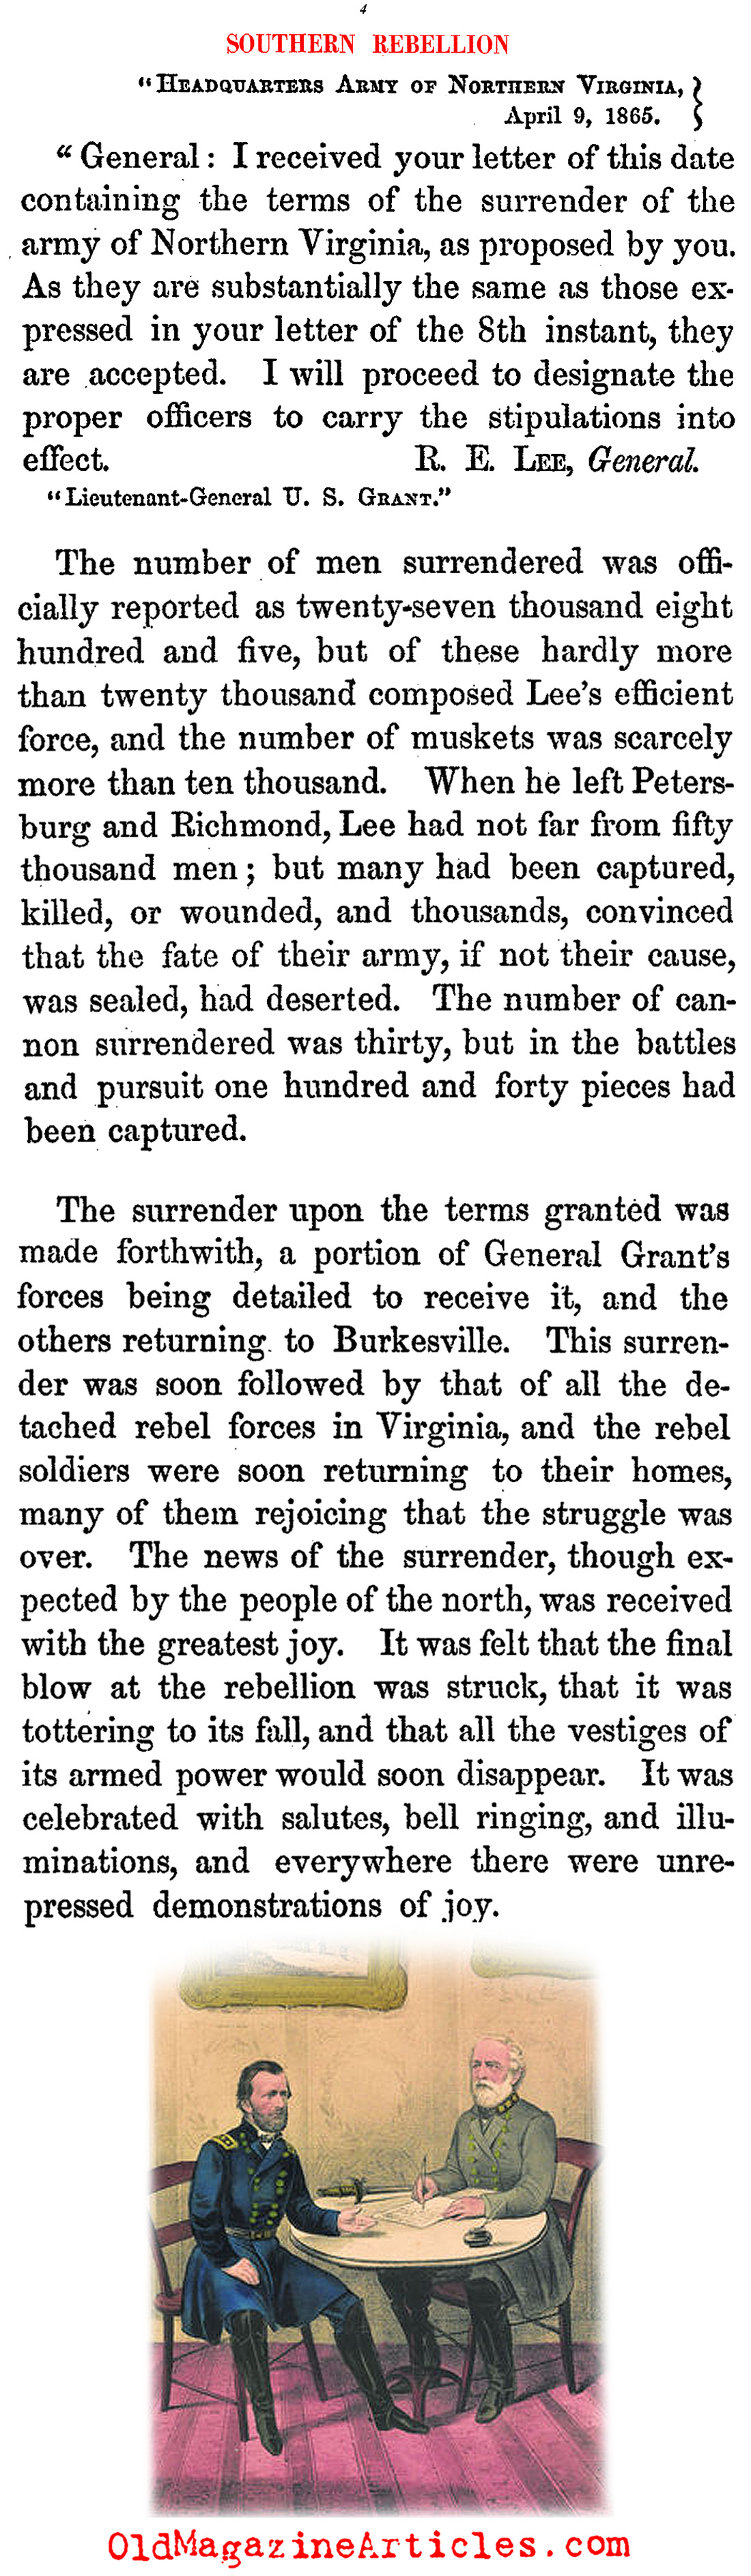 The Closing Letters Between Generals Grant and Lee (The Rebellion, 1867)